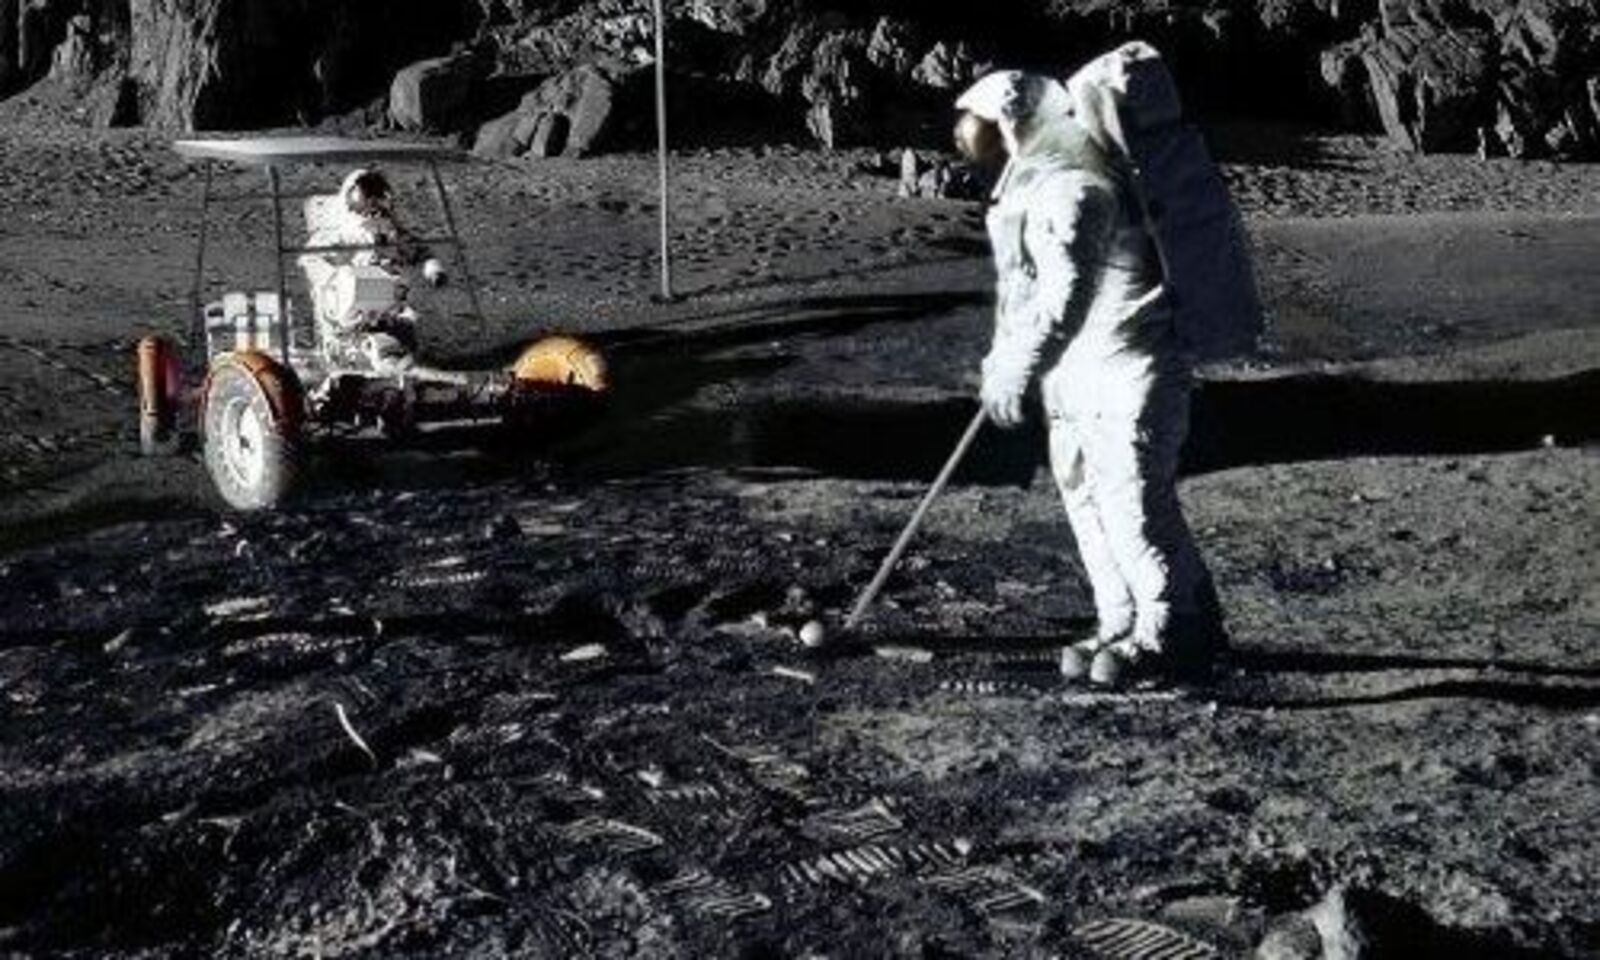 Apollo astronaut's 'lost' golf ball found 50 years later on the moon